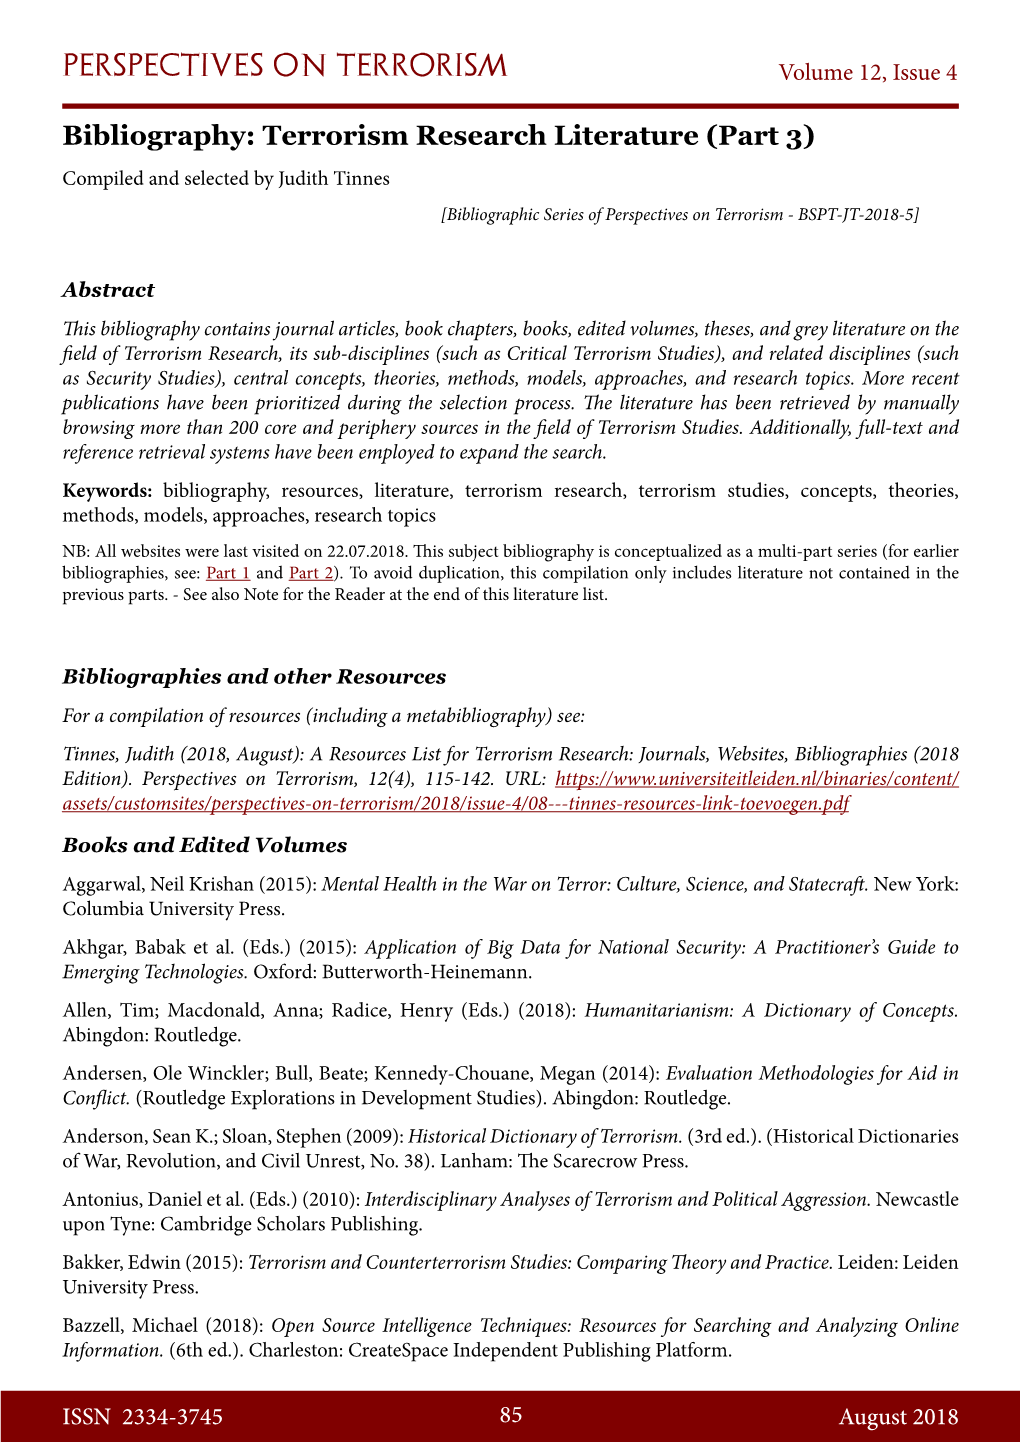 Bibliography: Terrorism Research Literature (Part 3) Compiled and Selected by Judith Tinnes [Bibliographic Series of Perspectives on Terrorism - BSPT-JT-2018-5]